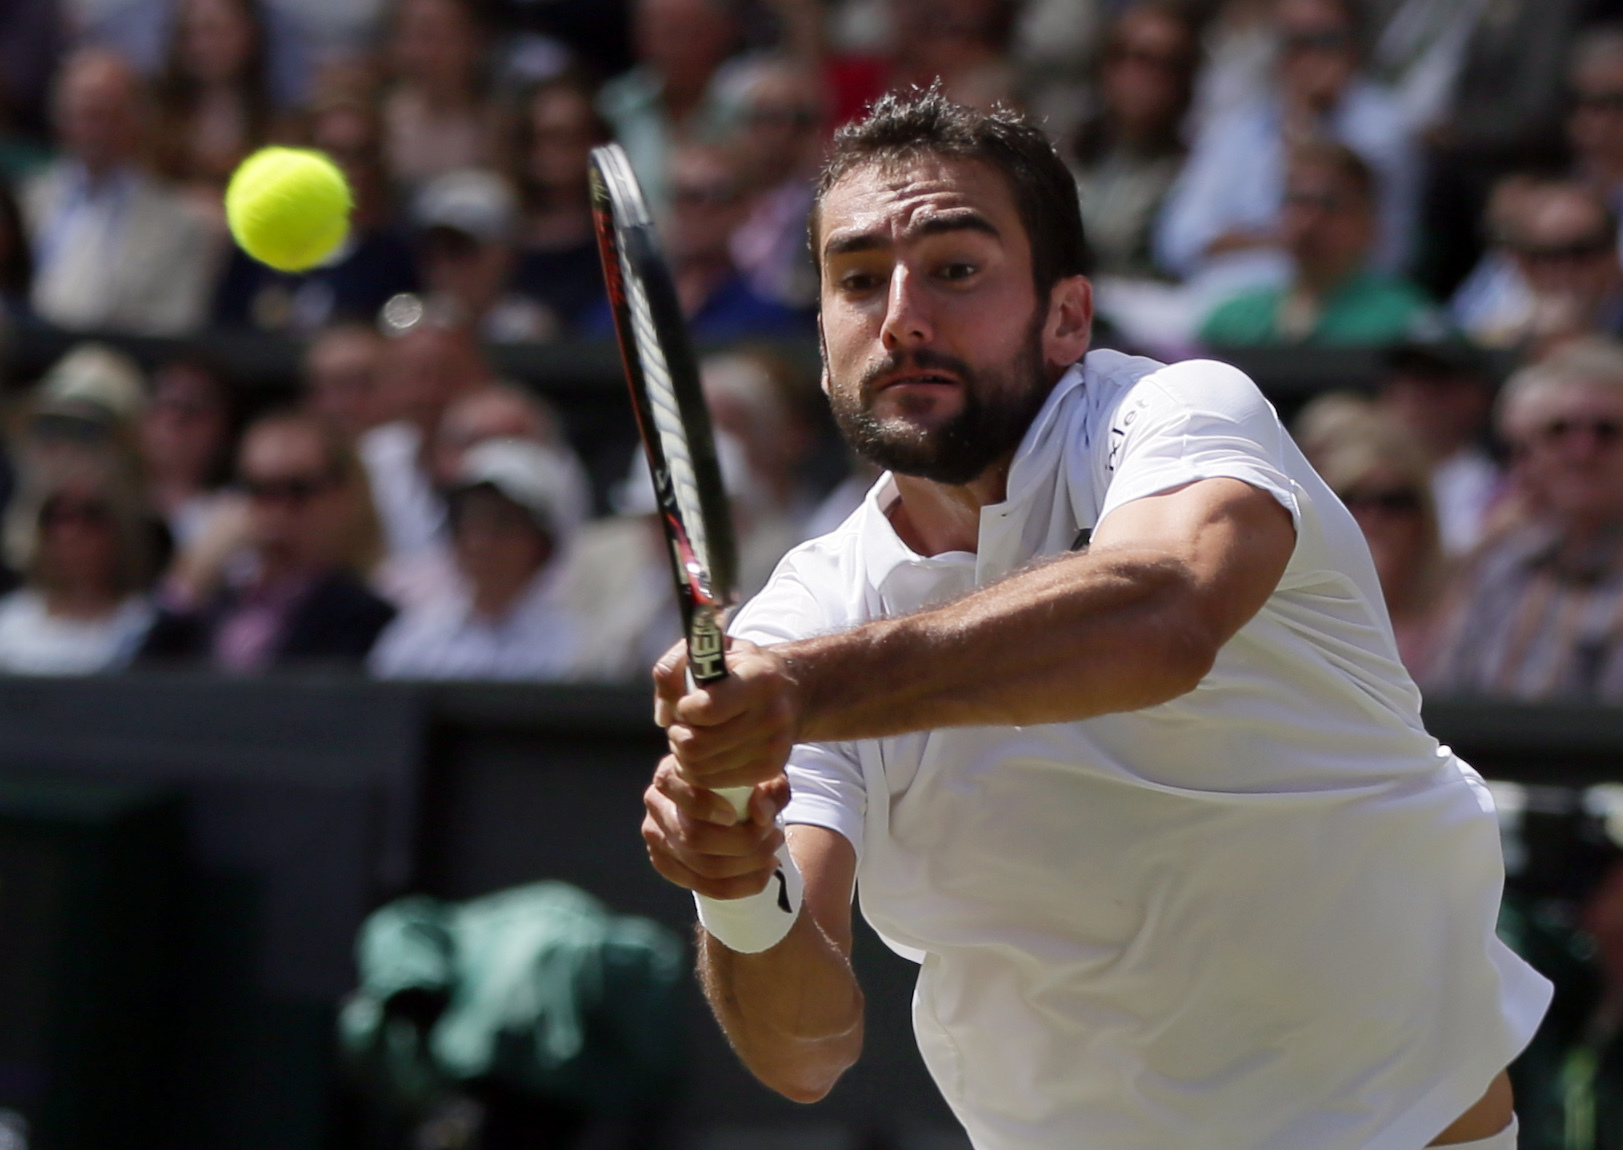 Marin Cilic of Croatia, pictured, and Ivan Dodig defeated Bob and Mike Bryan in the doubles match of the Davis Cup quarterfinals at Beaverton, Ore., on Saturday, July 16, 2017, to cut the U.S. lead in the best-of-five to 2-1.